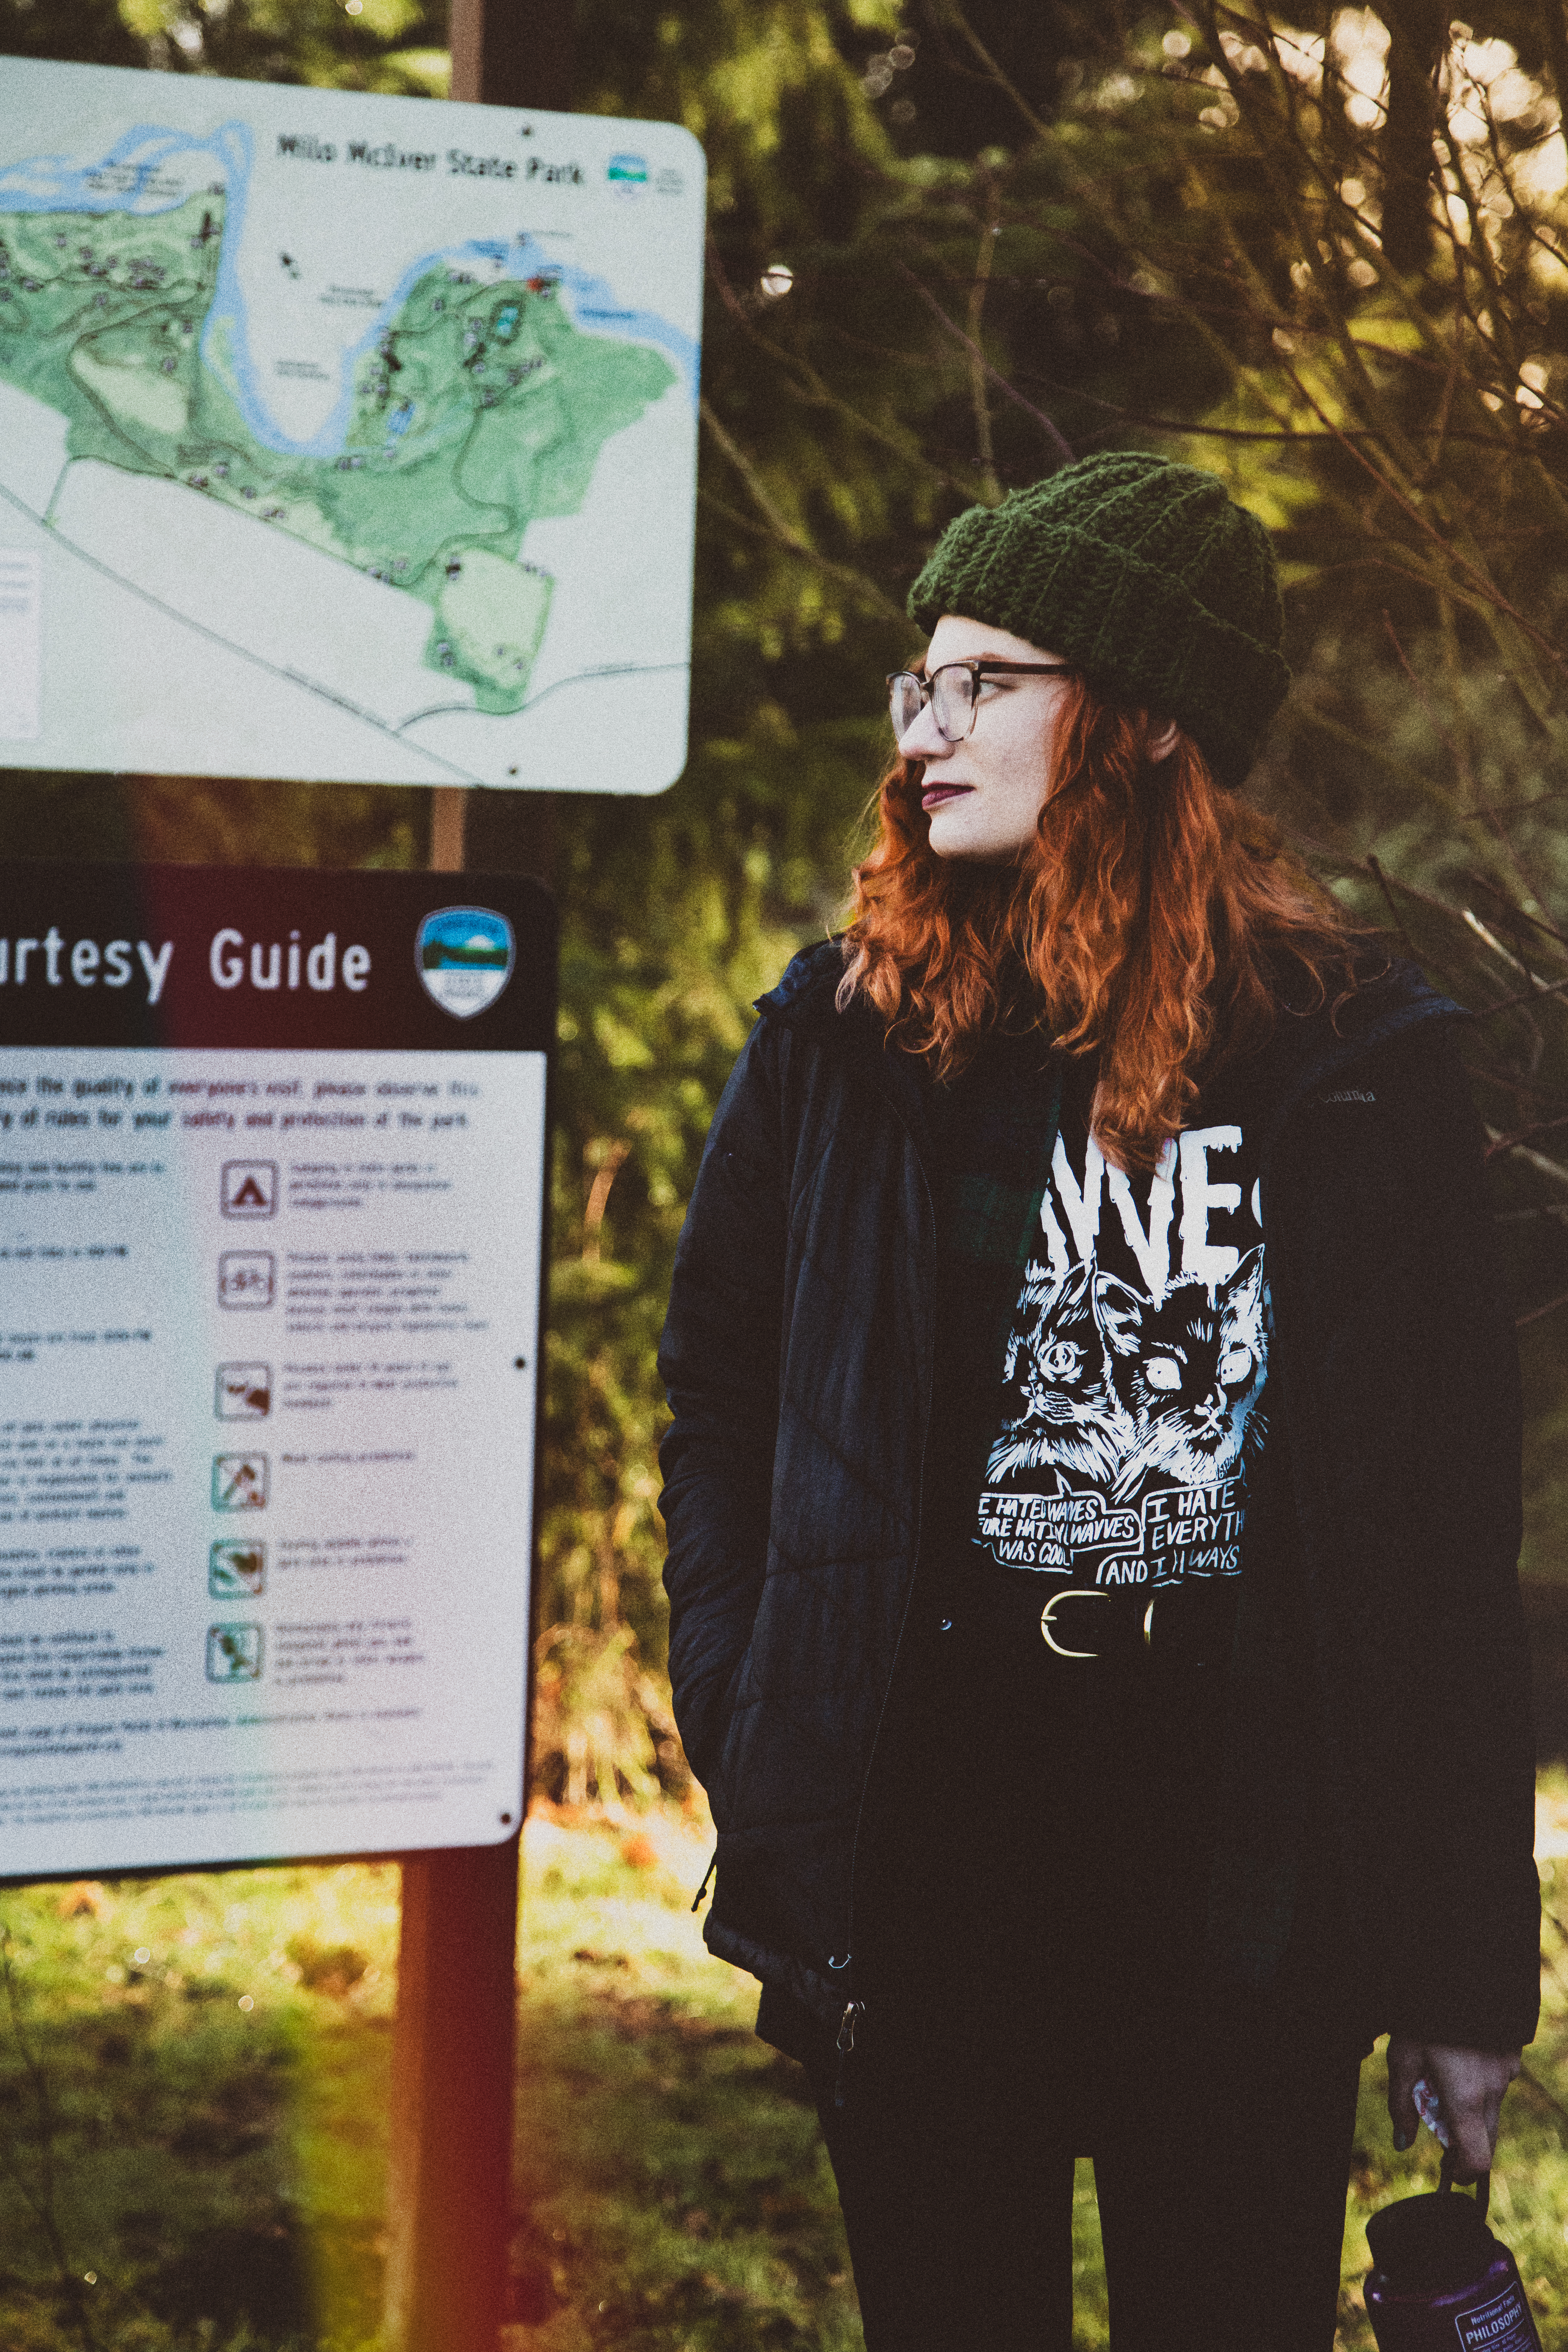 Kimberly Nachbur, a white woman with curly red hair, stands in a forest next to a trailhead sign. She is looking to the left, and she is wearing a green beanie, black rain jacket, black jeans, and a graphic t-shirt.